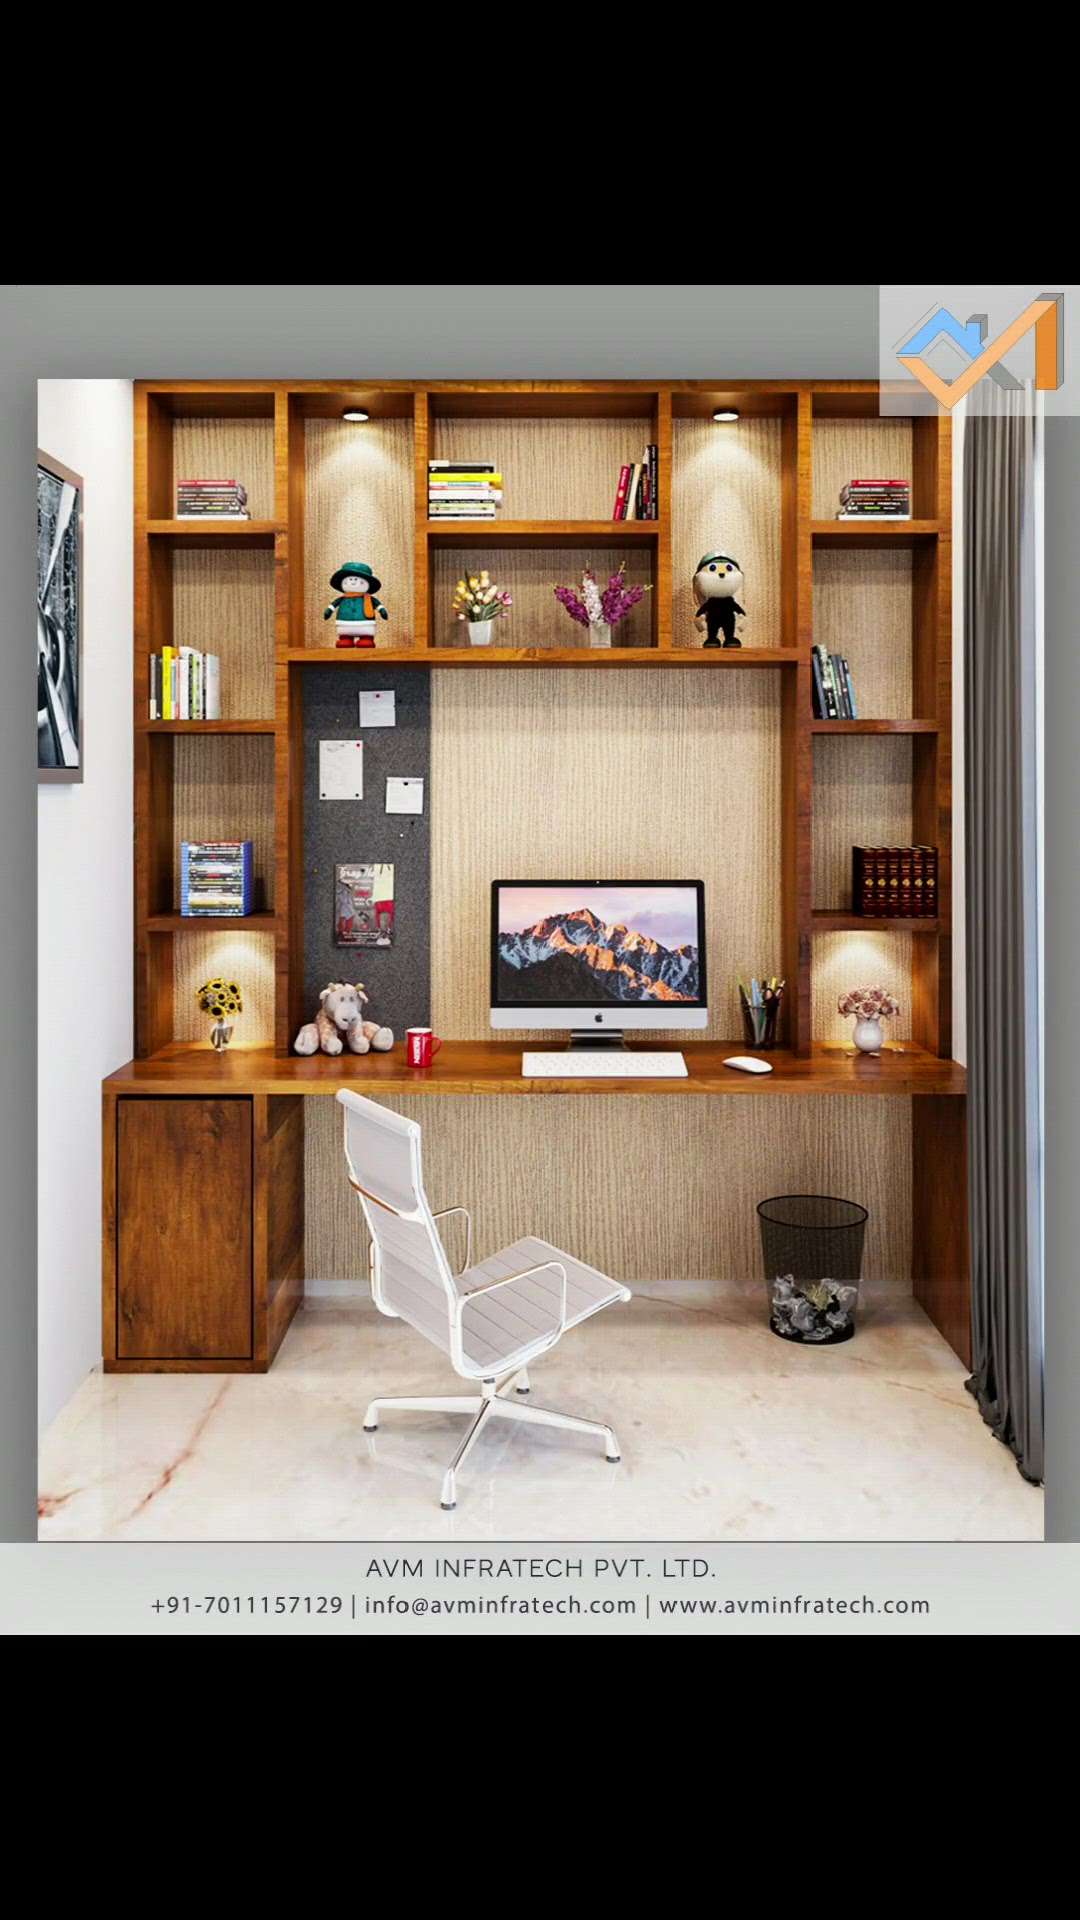 A contemporary study table with open drawers and simple designs makes it easy on the eye.


Follow us for more such amazing updates. 
.
.
#study #studymotivation #studytable #table #tabledecor #designinterior #designprocess #design #decor #studygram #studytips #studymemes #studytime #avminfratech #roomdecoration #roomdesign #chairs #chair #storage #storageideas #storagesolutions #storagegoals #studyroom #studyroomdesign